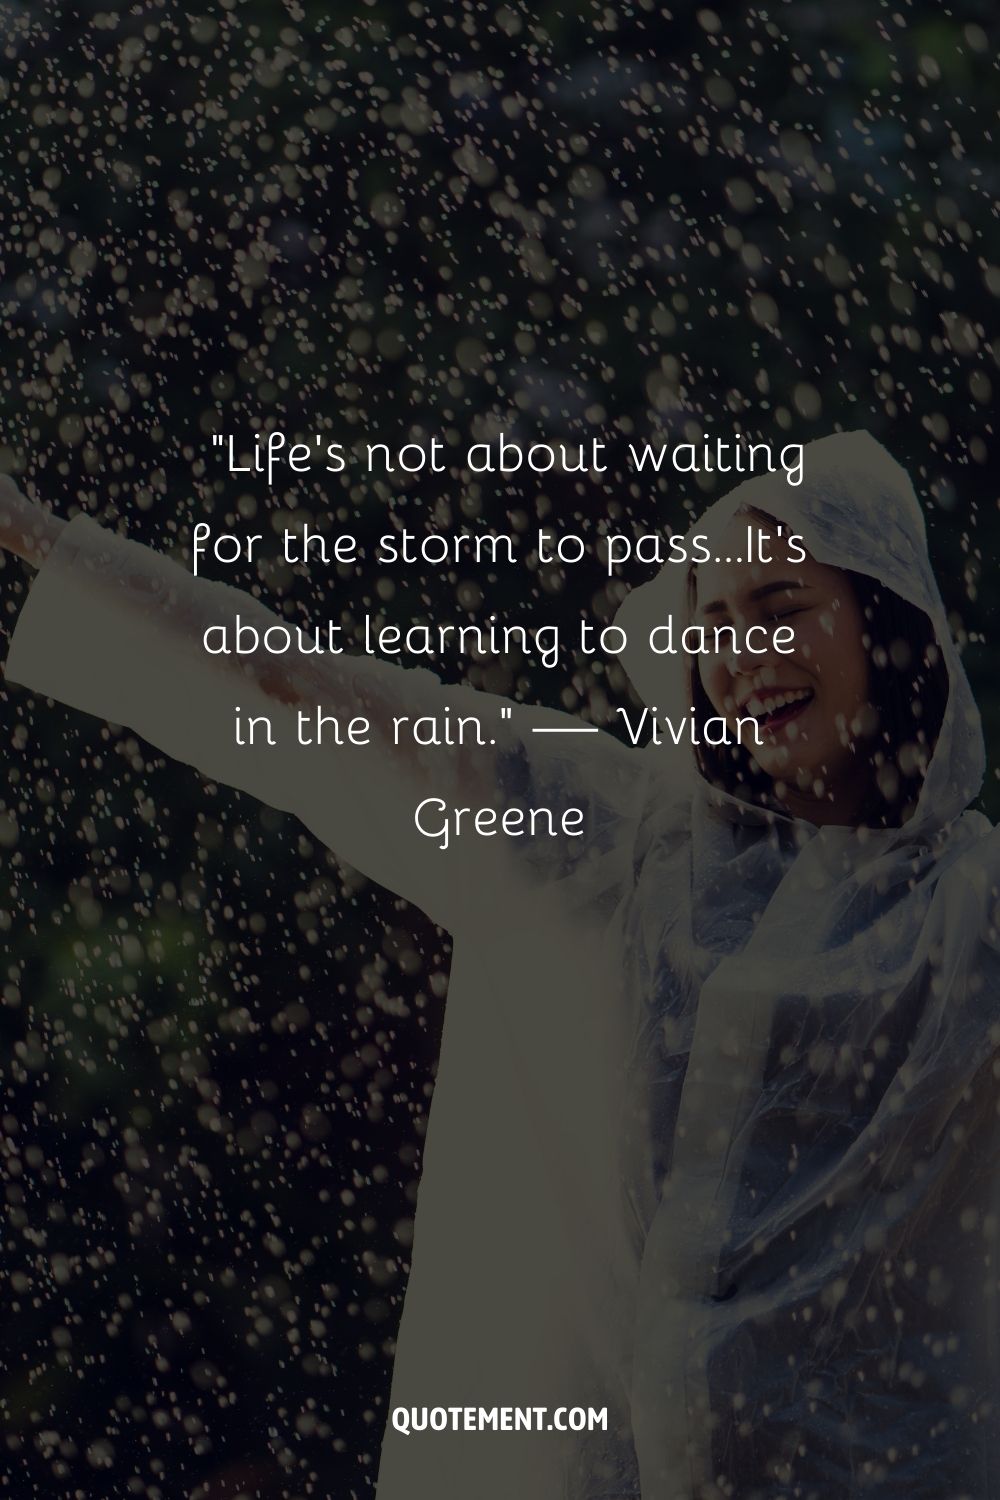 A woman joyfully extending her arms in the rain representing an amazing rainy day quote
